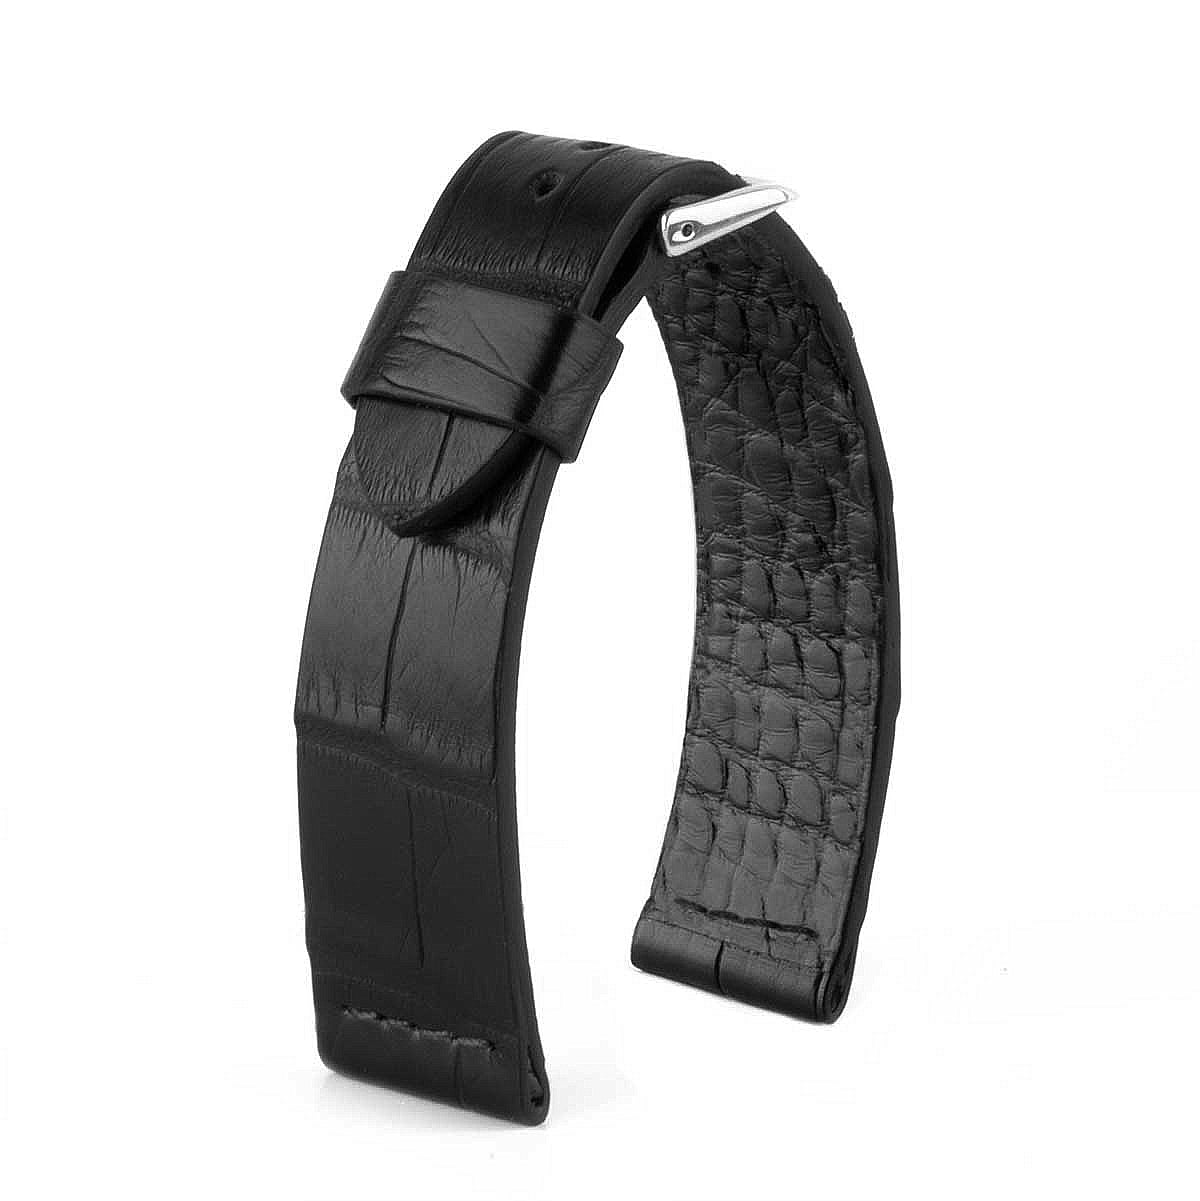 Leather watch strap - Sustainable alligator